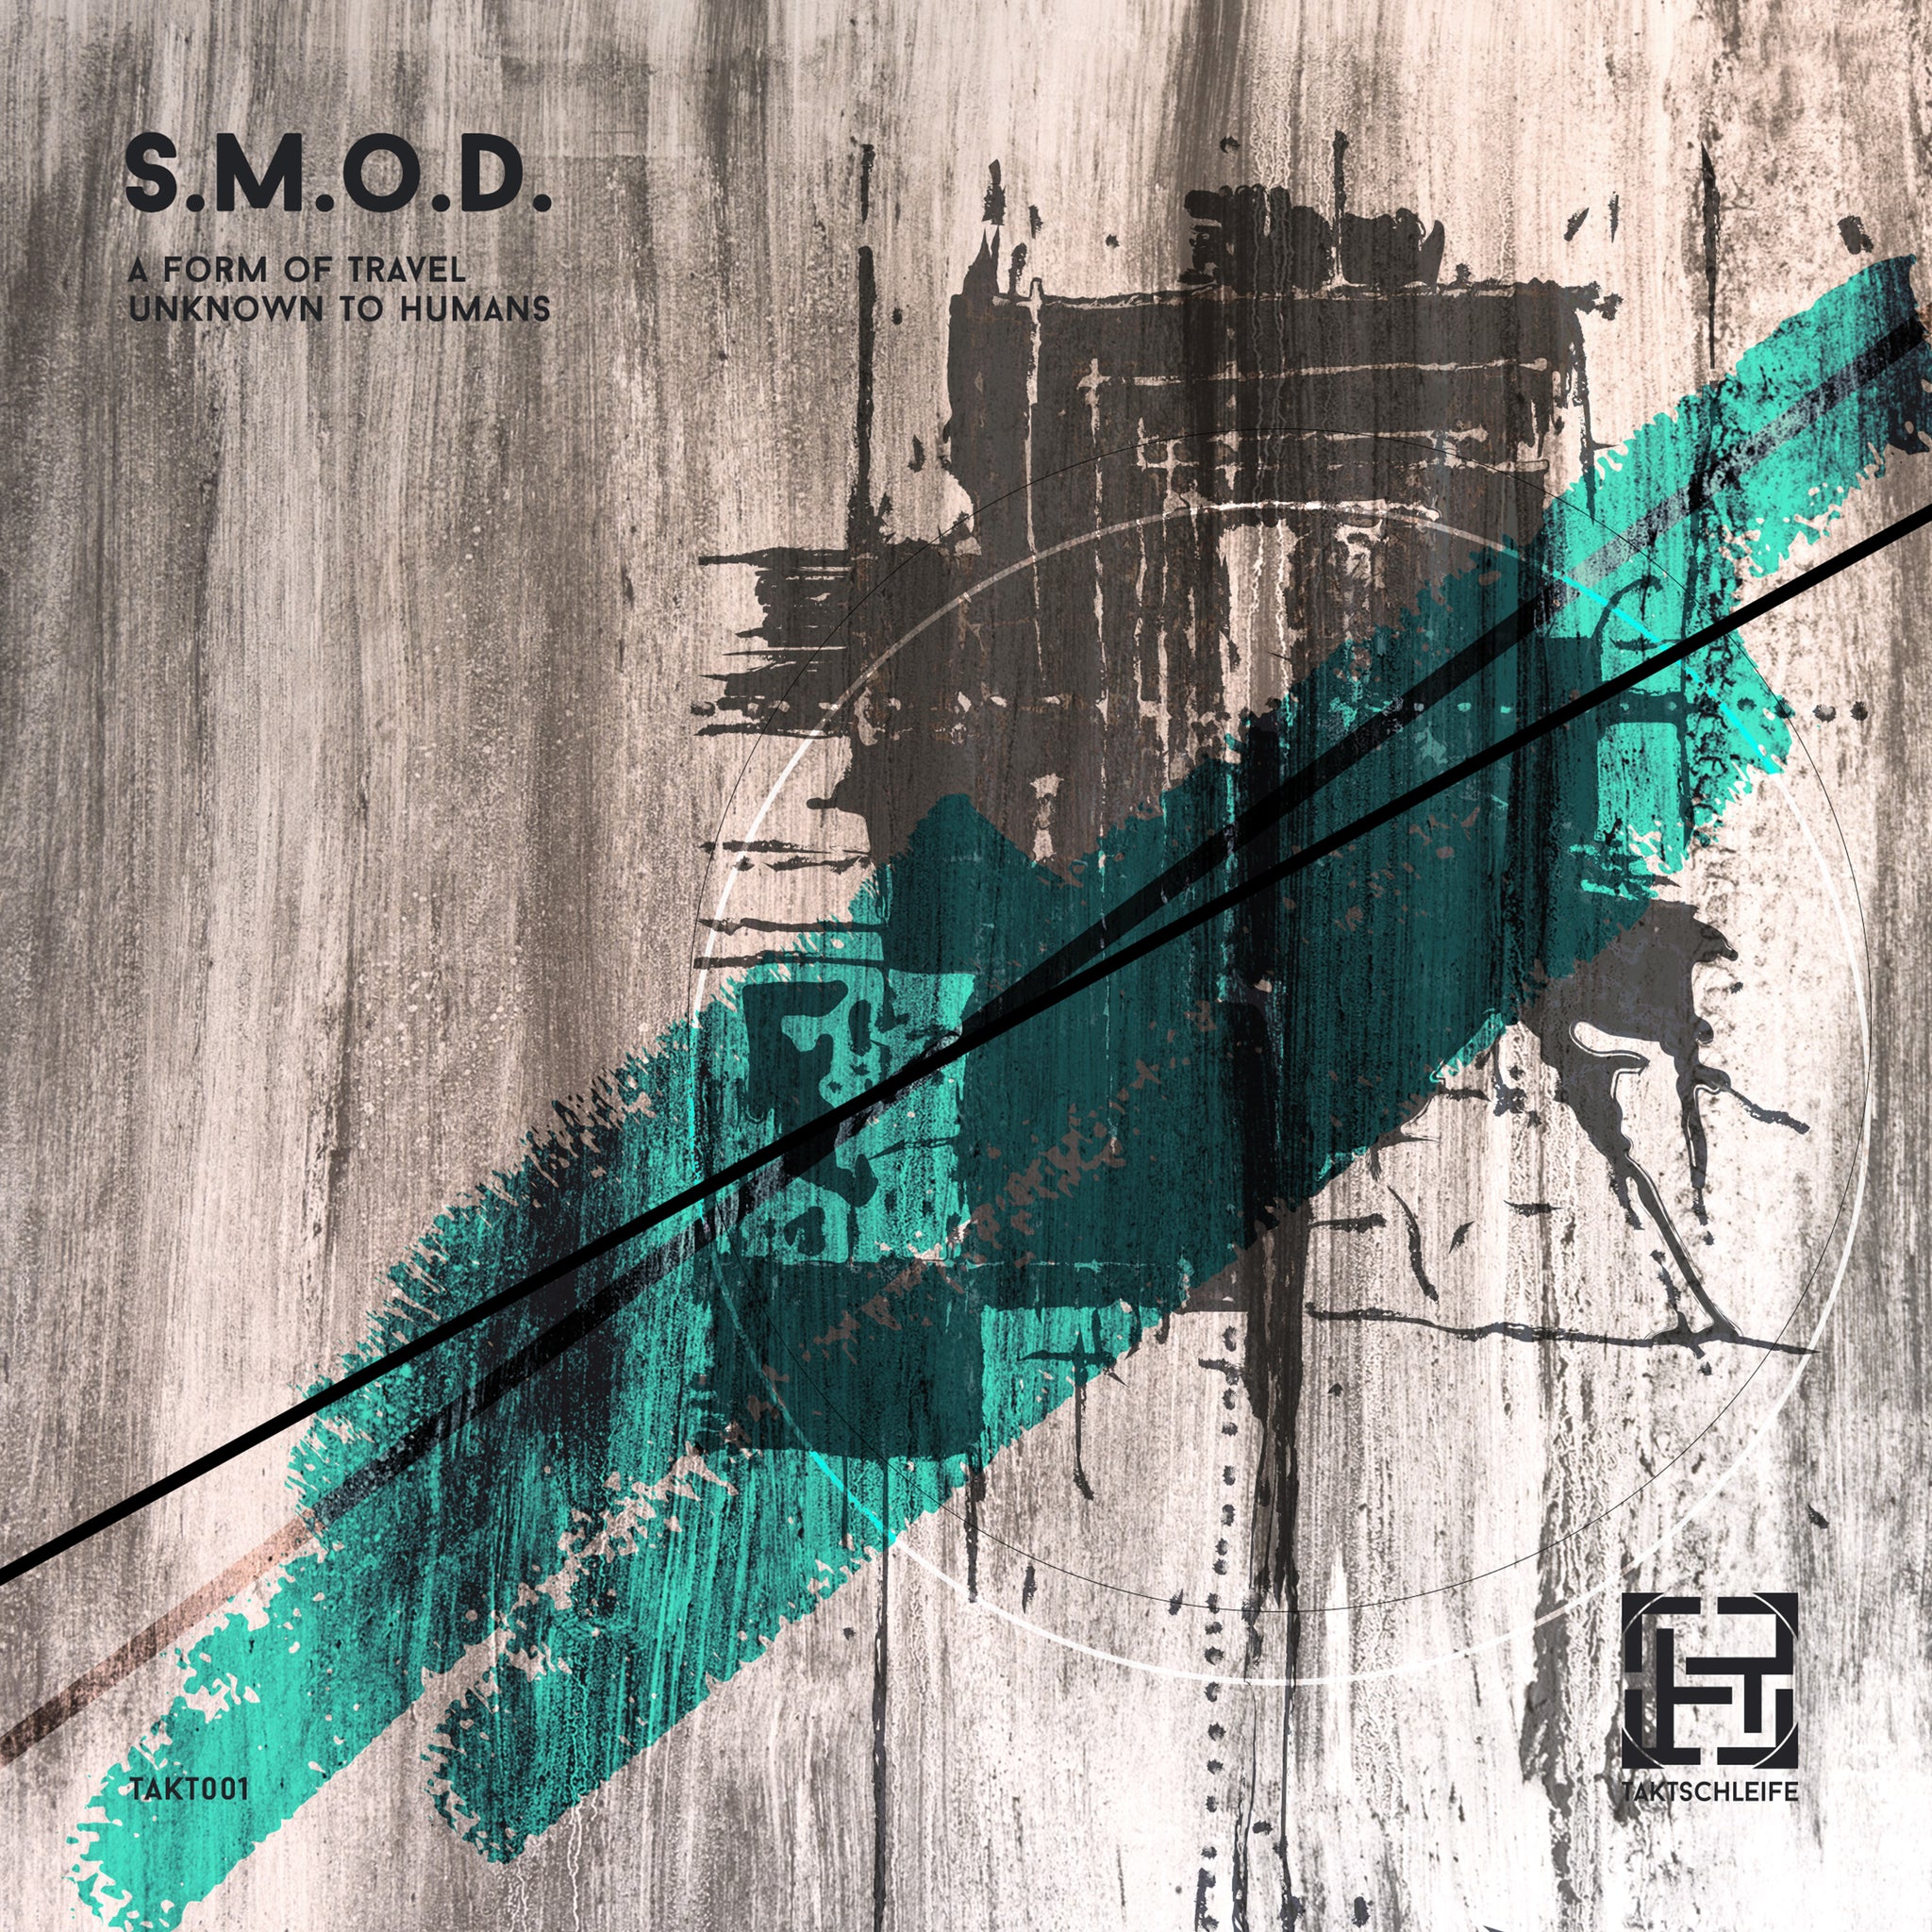 S.M.O.D. - A Form of Travel Unknown to Humans (VINYL)